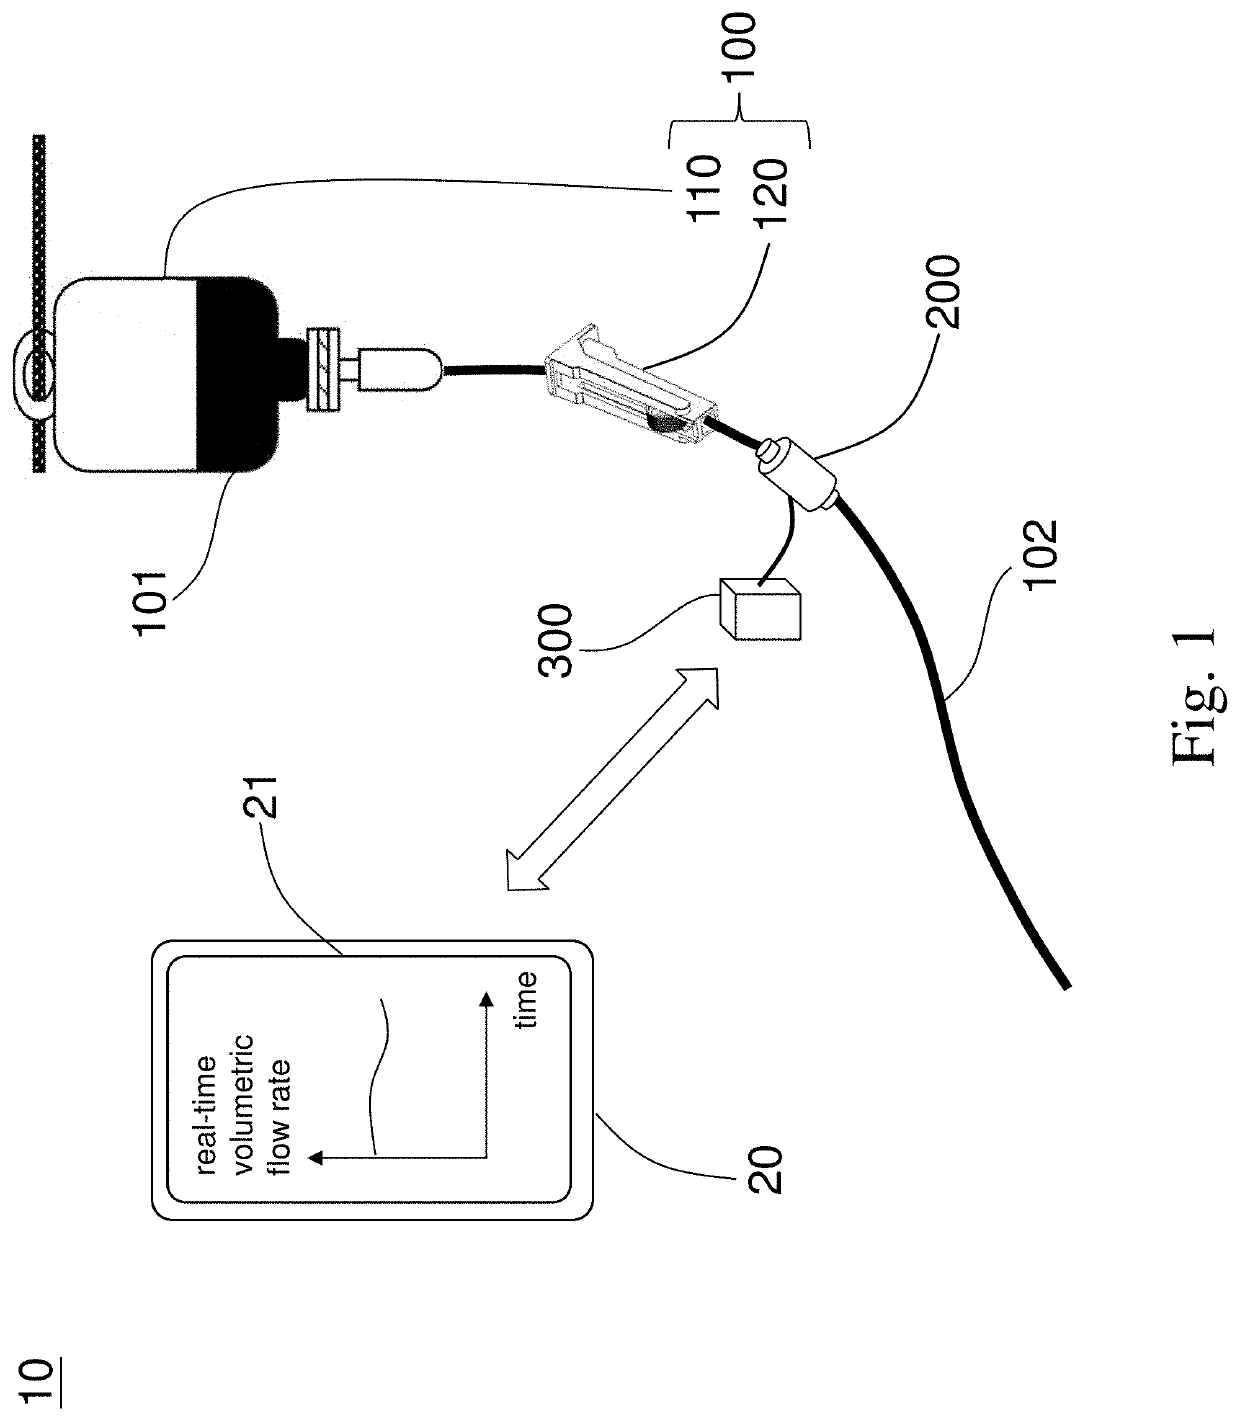 Intravenous infusion system with real-time infusion rate monitoring and closed-loop infusion rate control